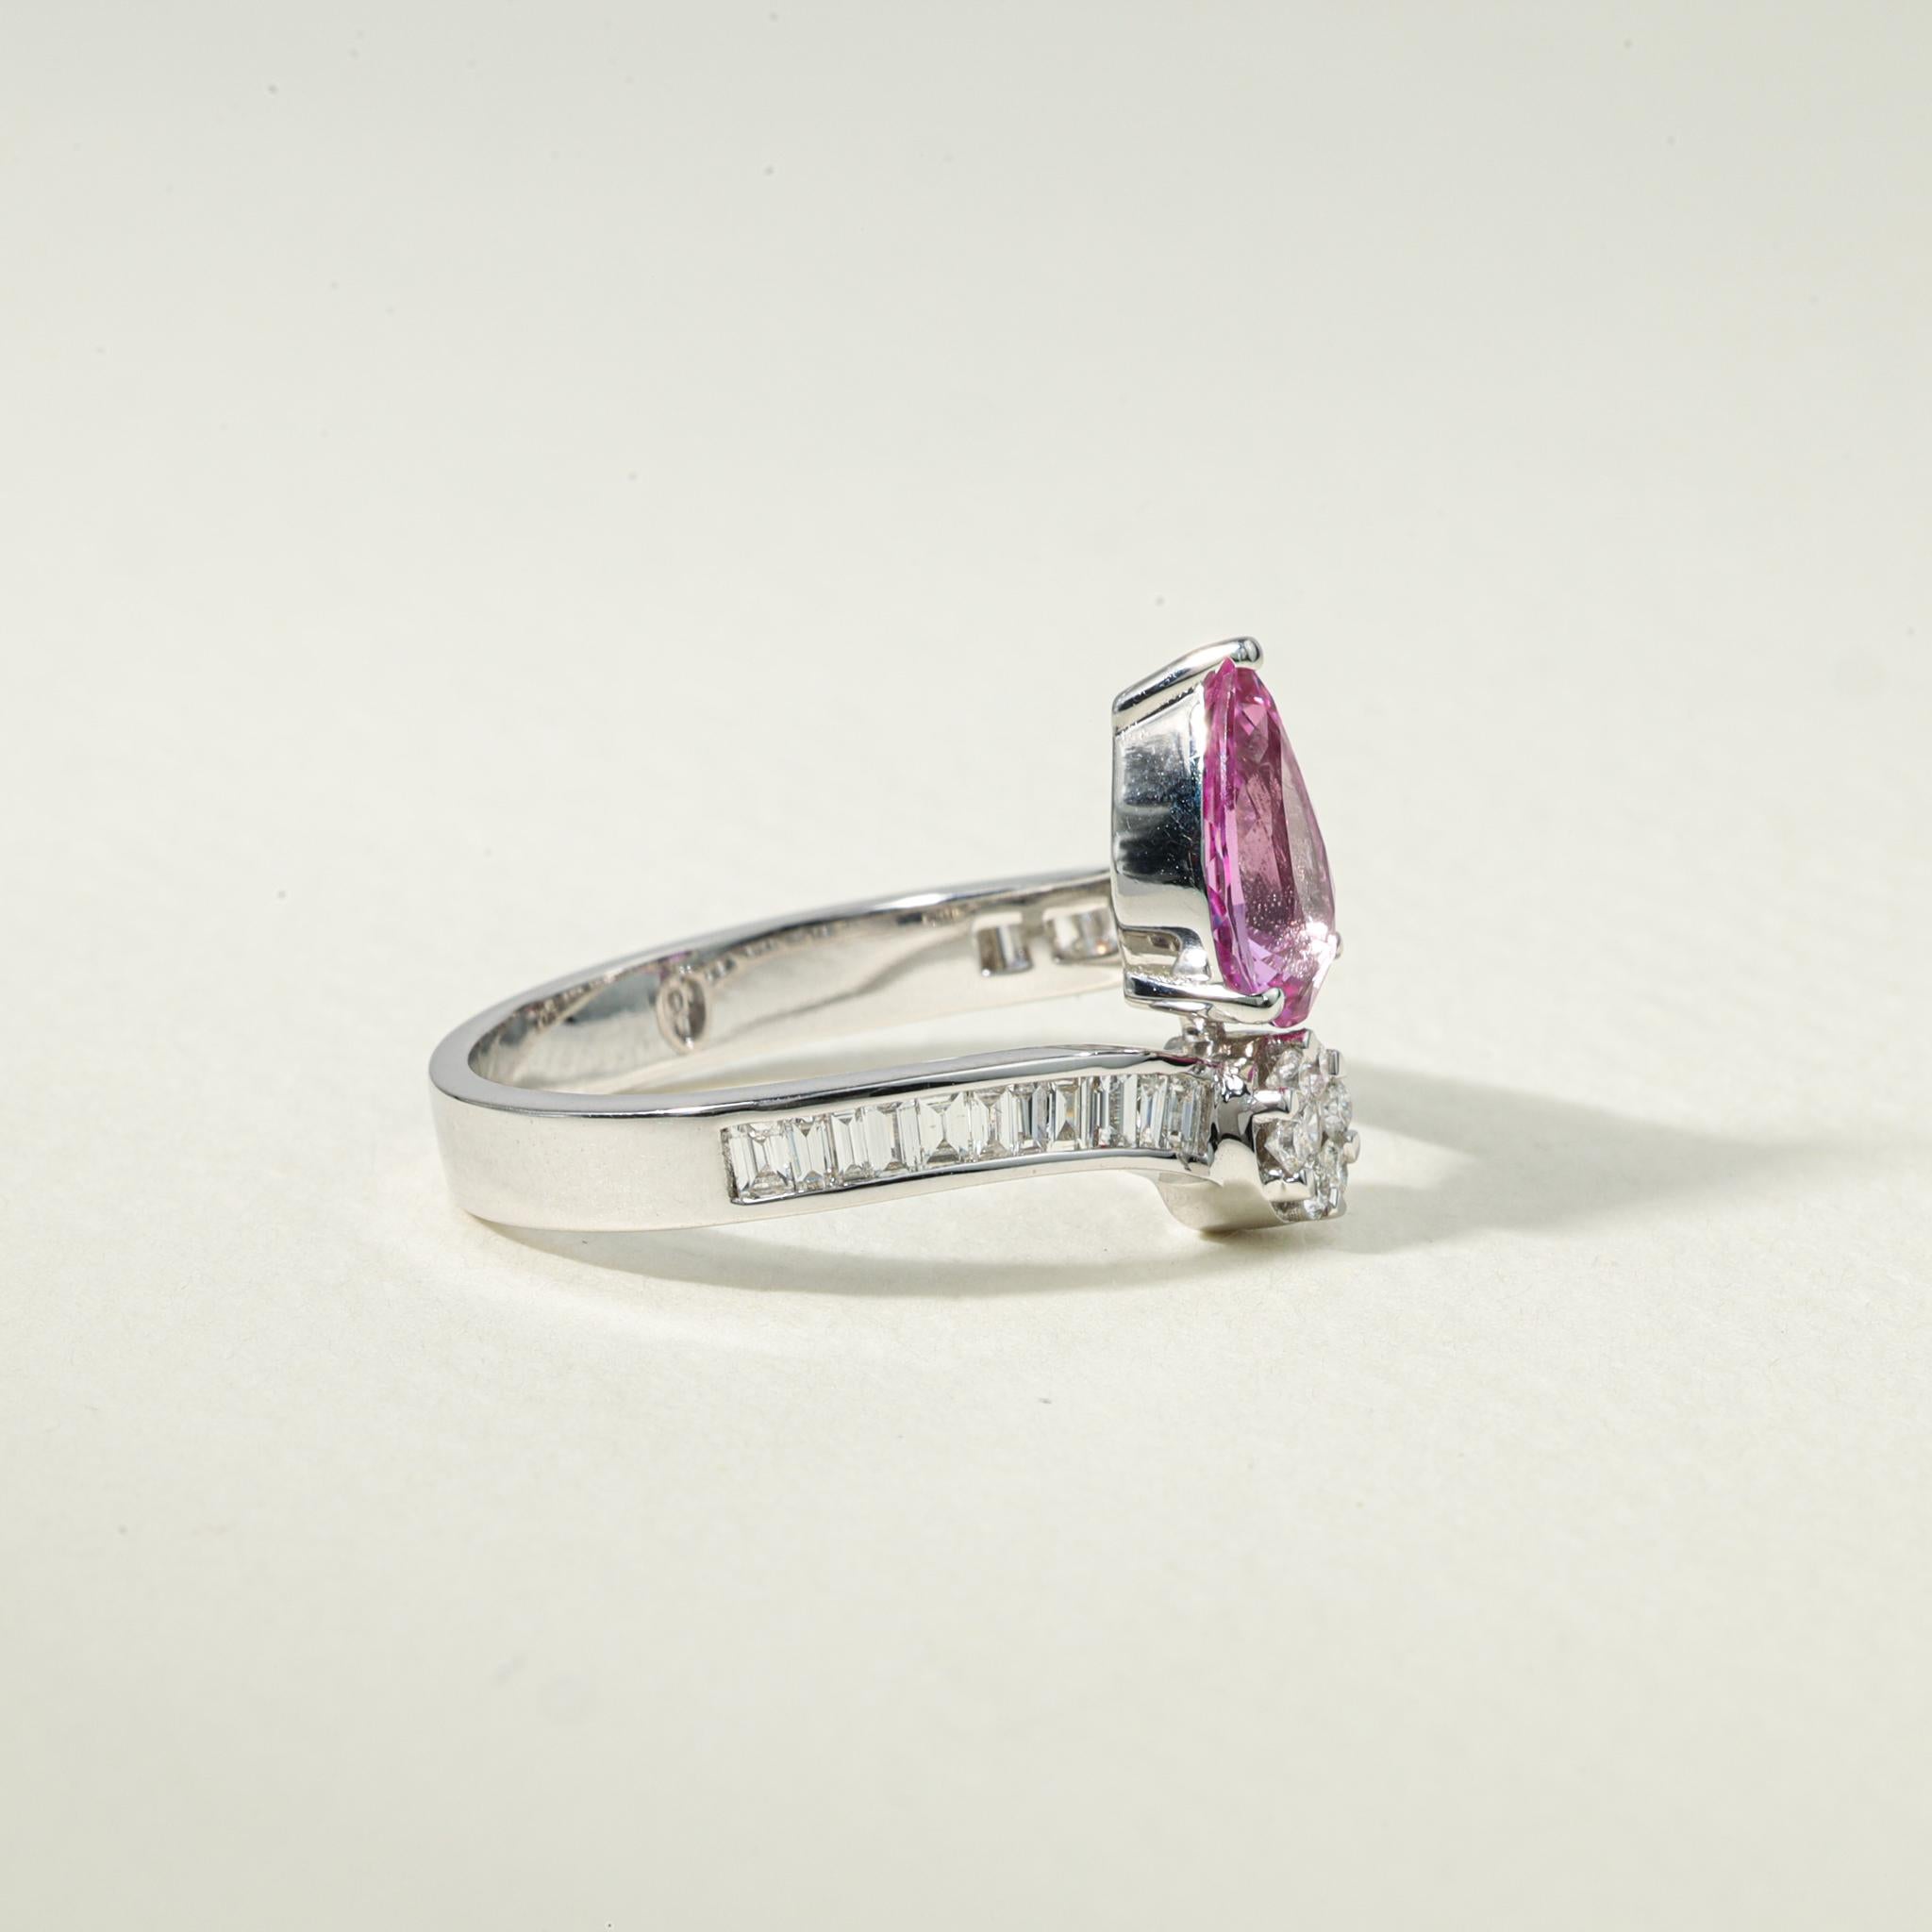 1.5 Carat Pear Pink Sapphire Diamond Cocktail Engagement Ring in 18k White Gold For Sale 1